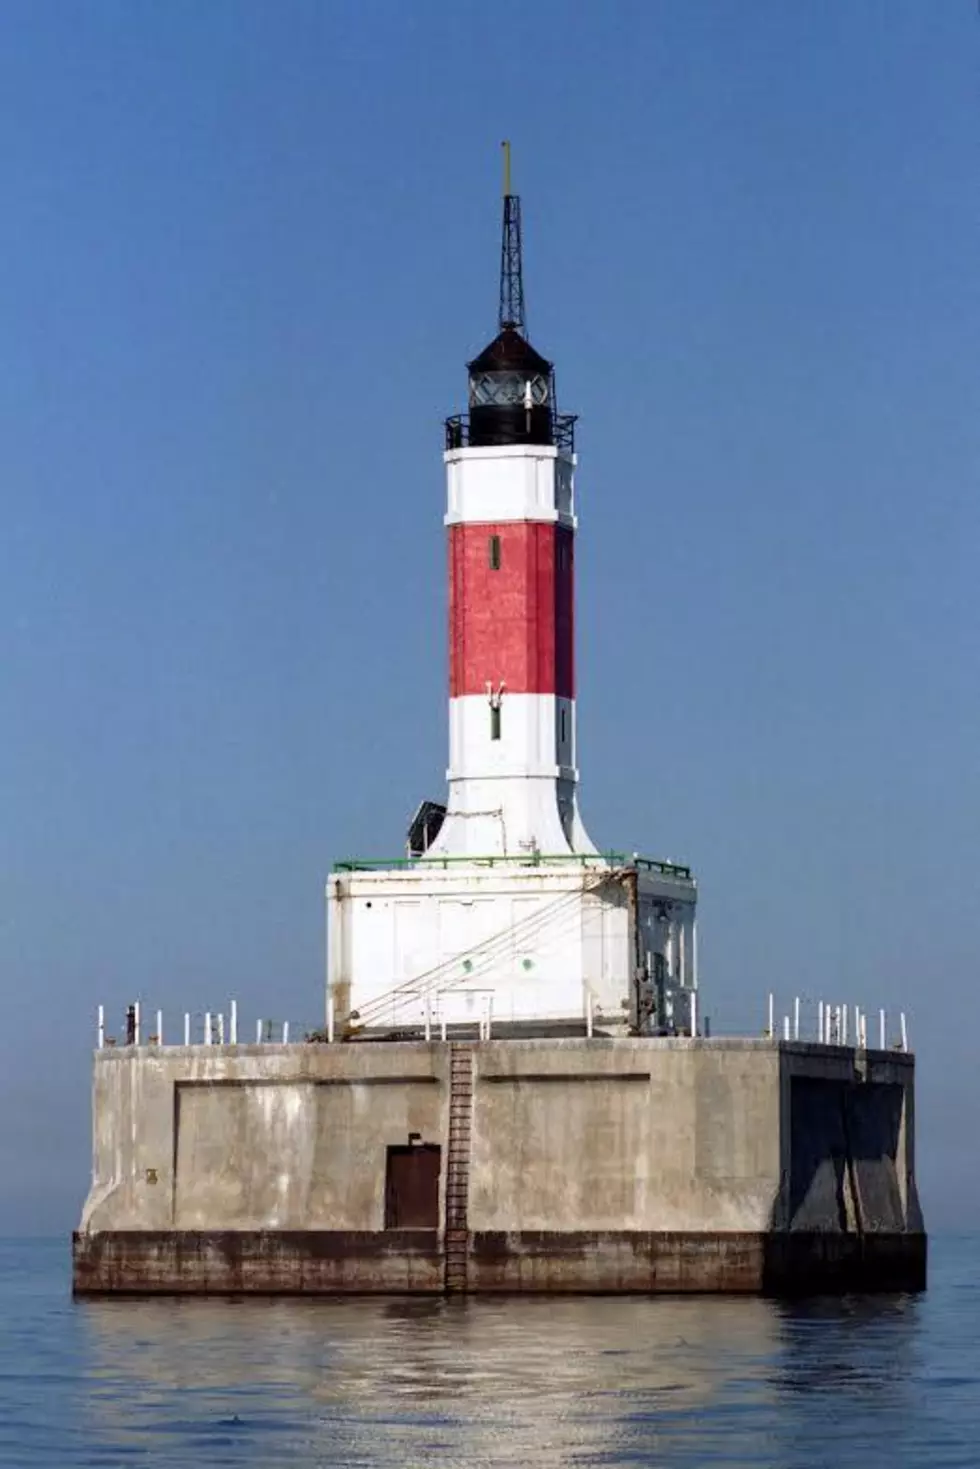 Another Michigan Lighthouse Is For Sale, But You’d Better Have A Boat